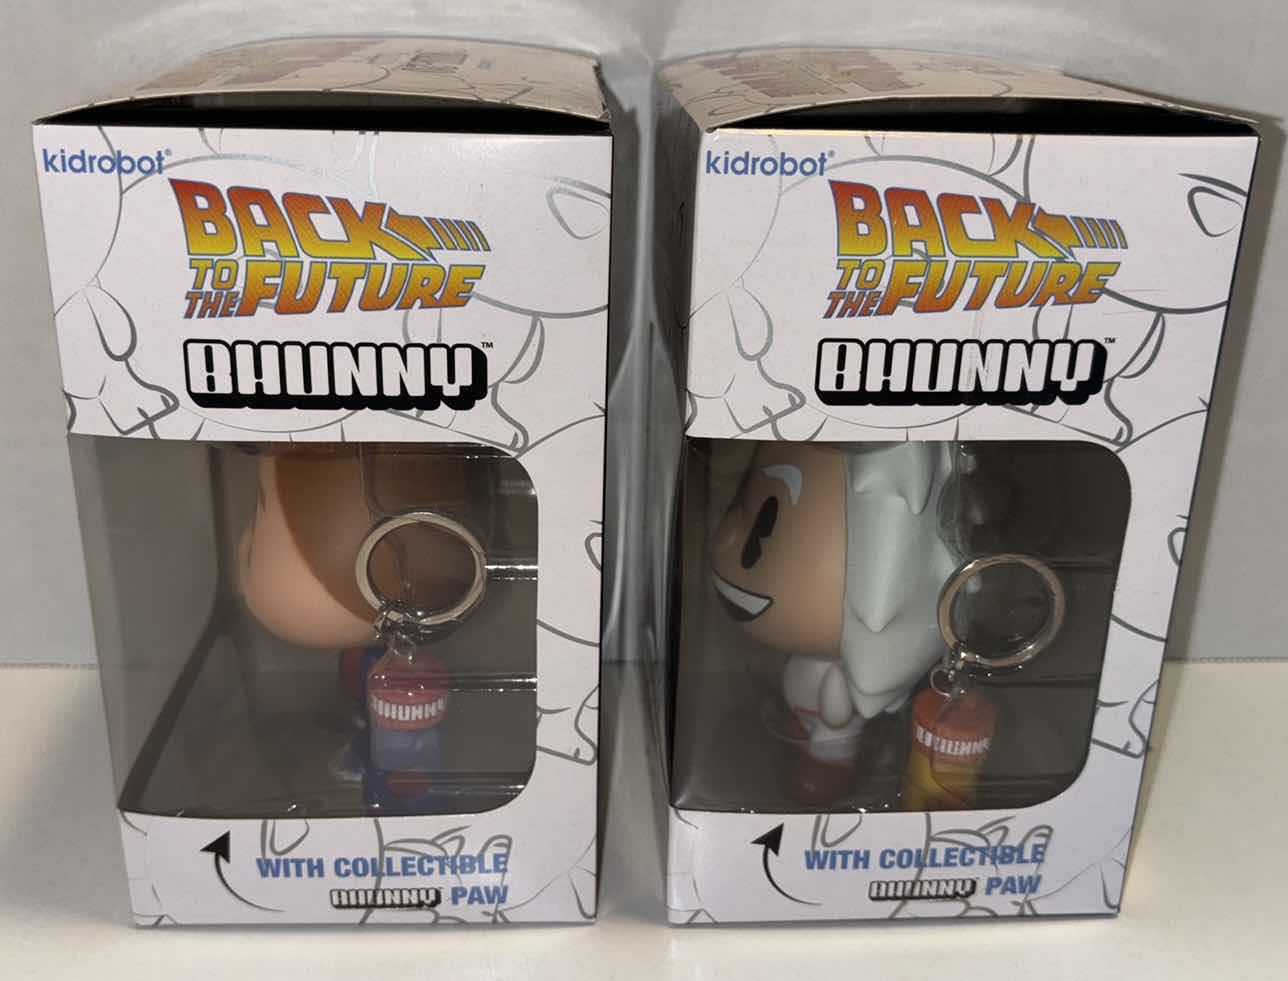 Photo 4 of NEW KIDROBOT BACK TO THE FUTURE 2-PACK BHUNNY 4” VINYL FIGURE, MARTY MCFLY & DOC BROWN W BHUNNY PAW KEYCHAIN